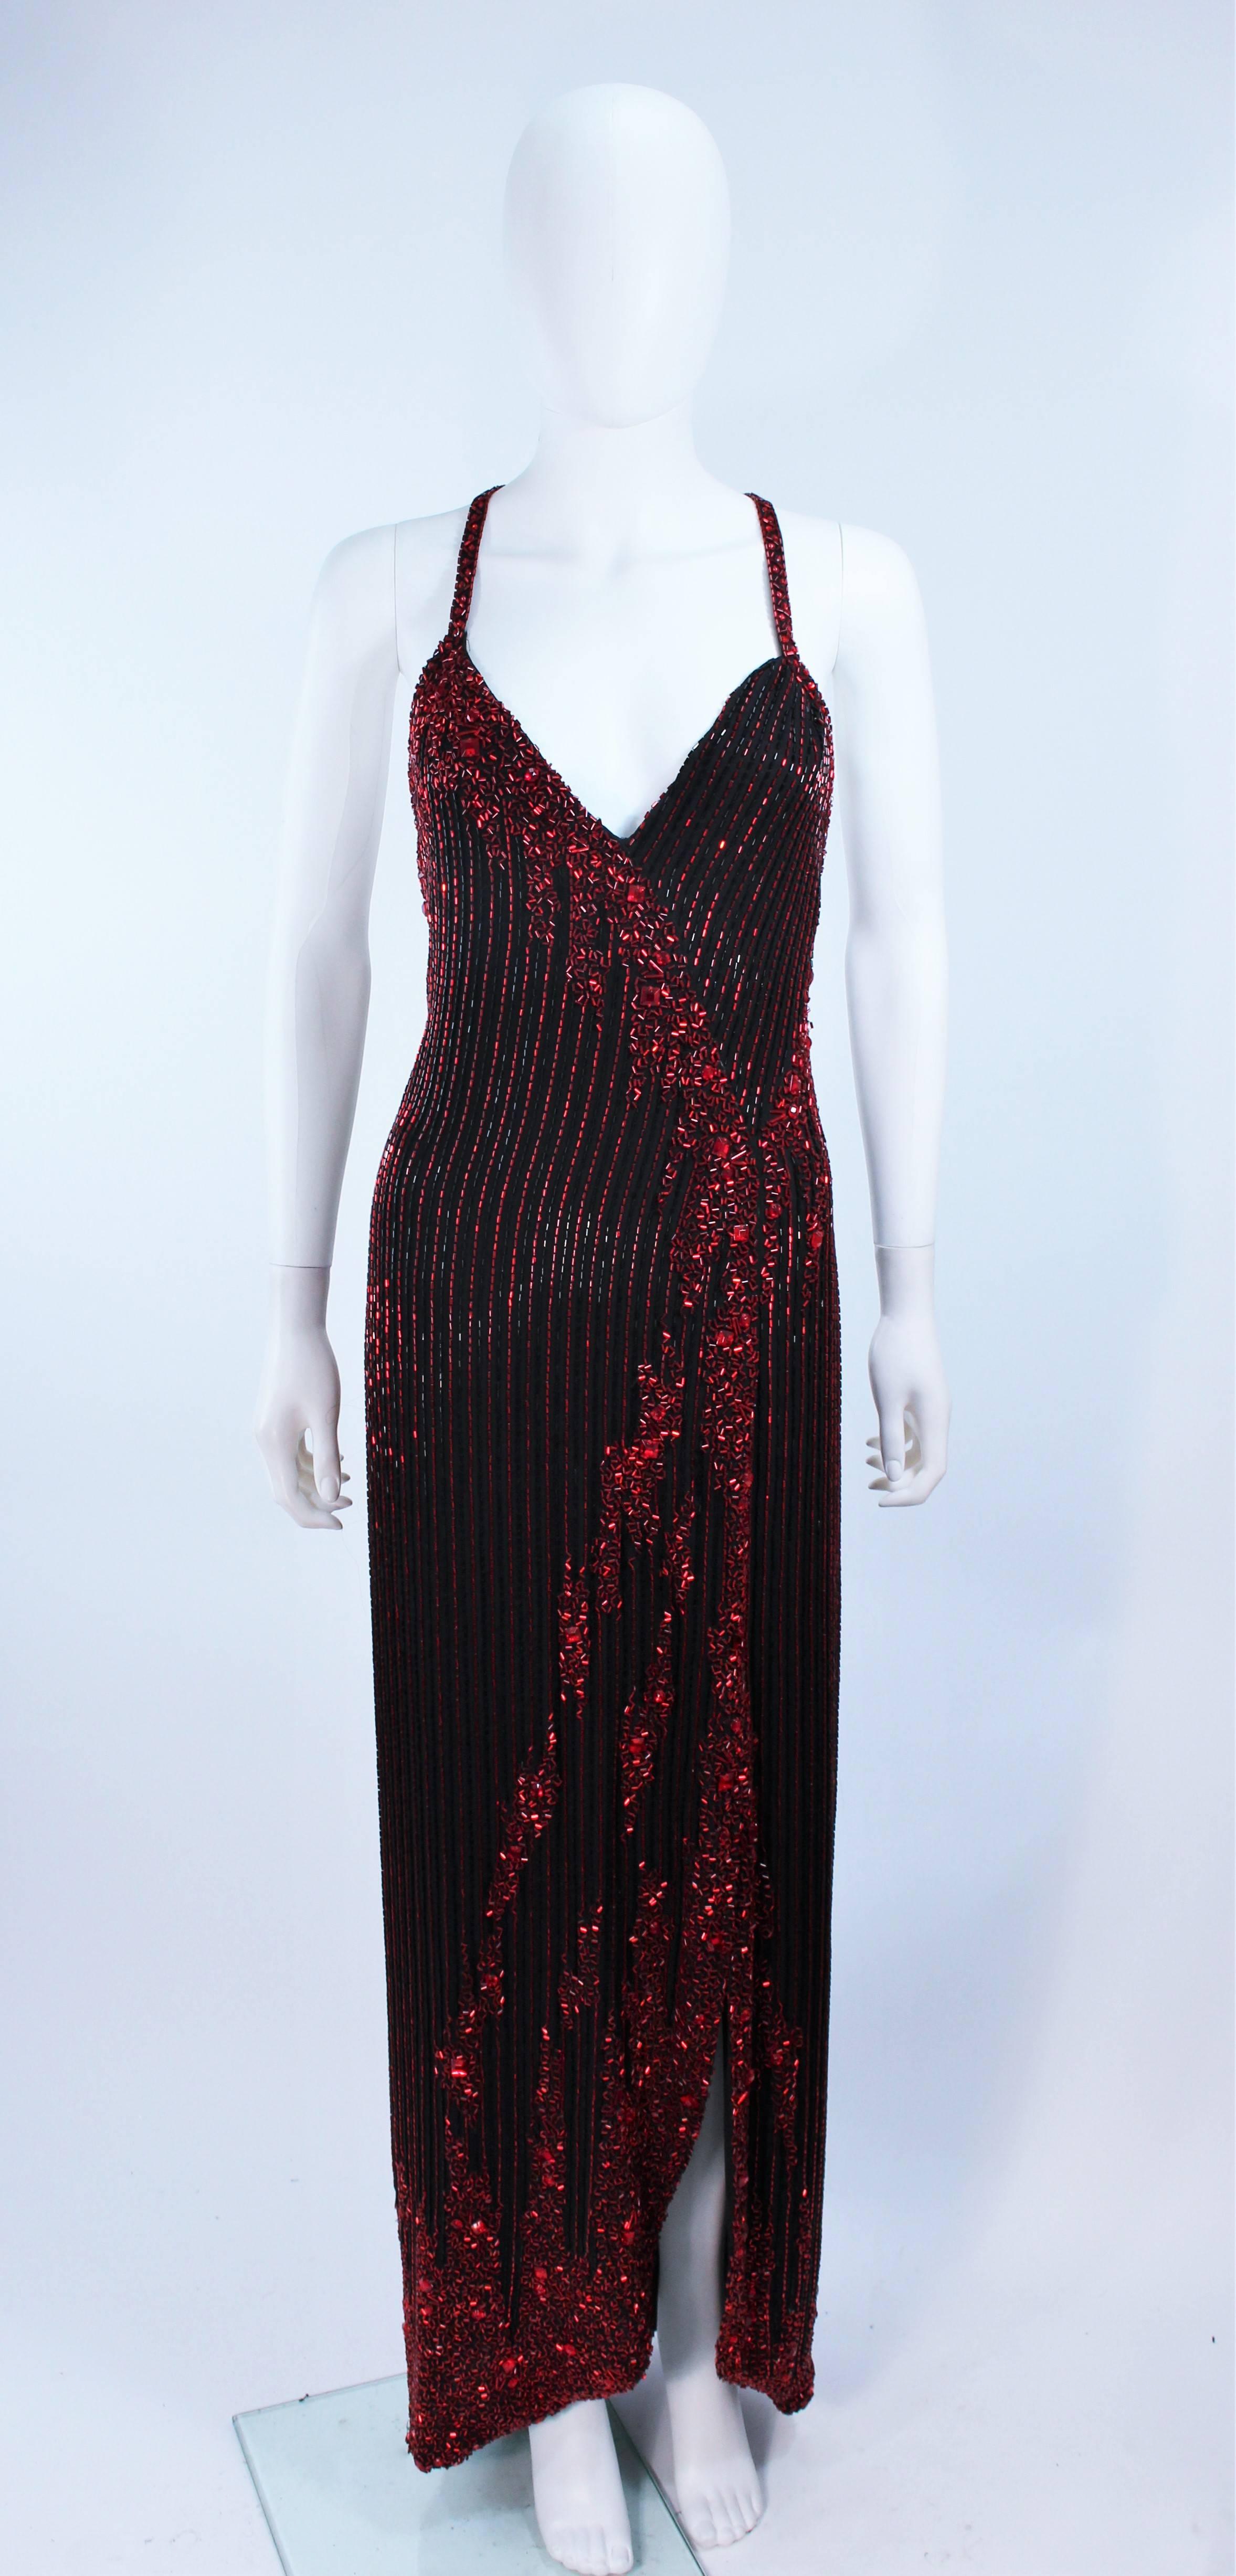 This Bob Mackie  gown is composed of an embellished silk with red beading. Features a racer style halter with dropped back and center back zipper. Excellent vintage condition.

This gown is the same model as seen on Brooke Shields on the cover of